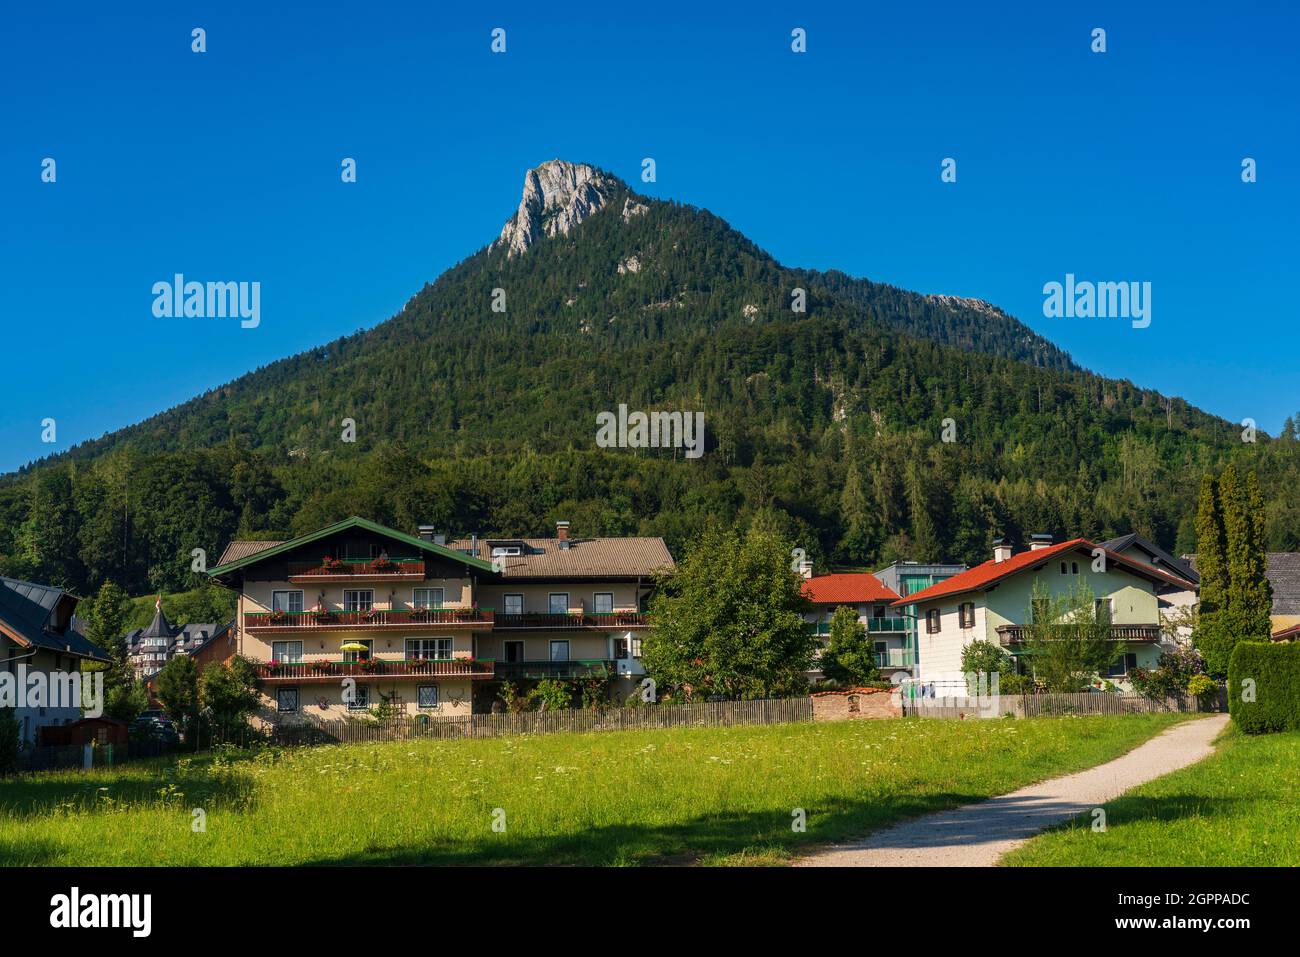 Austria, Fuschl am See, Houses with mountain in background Stock Photo